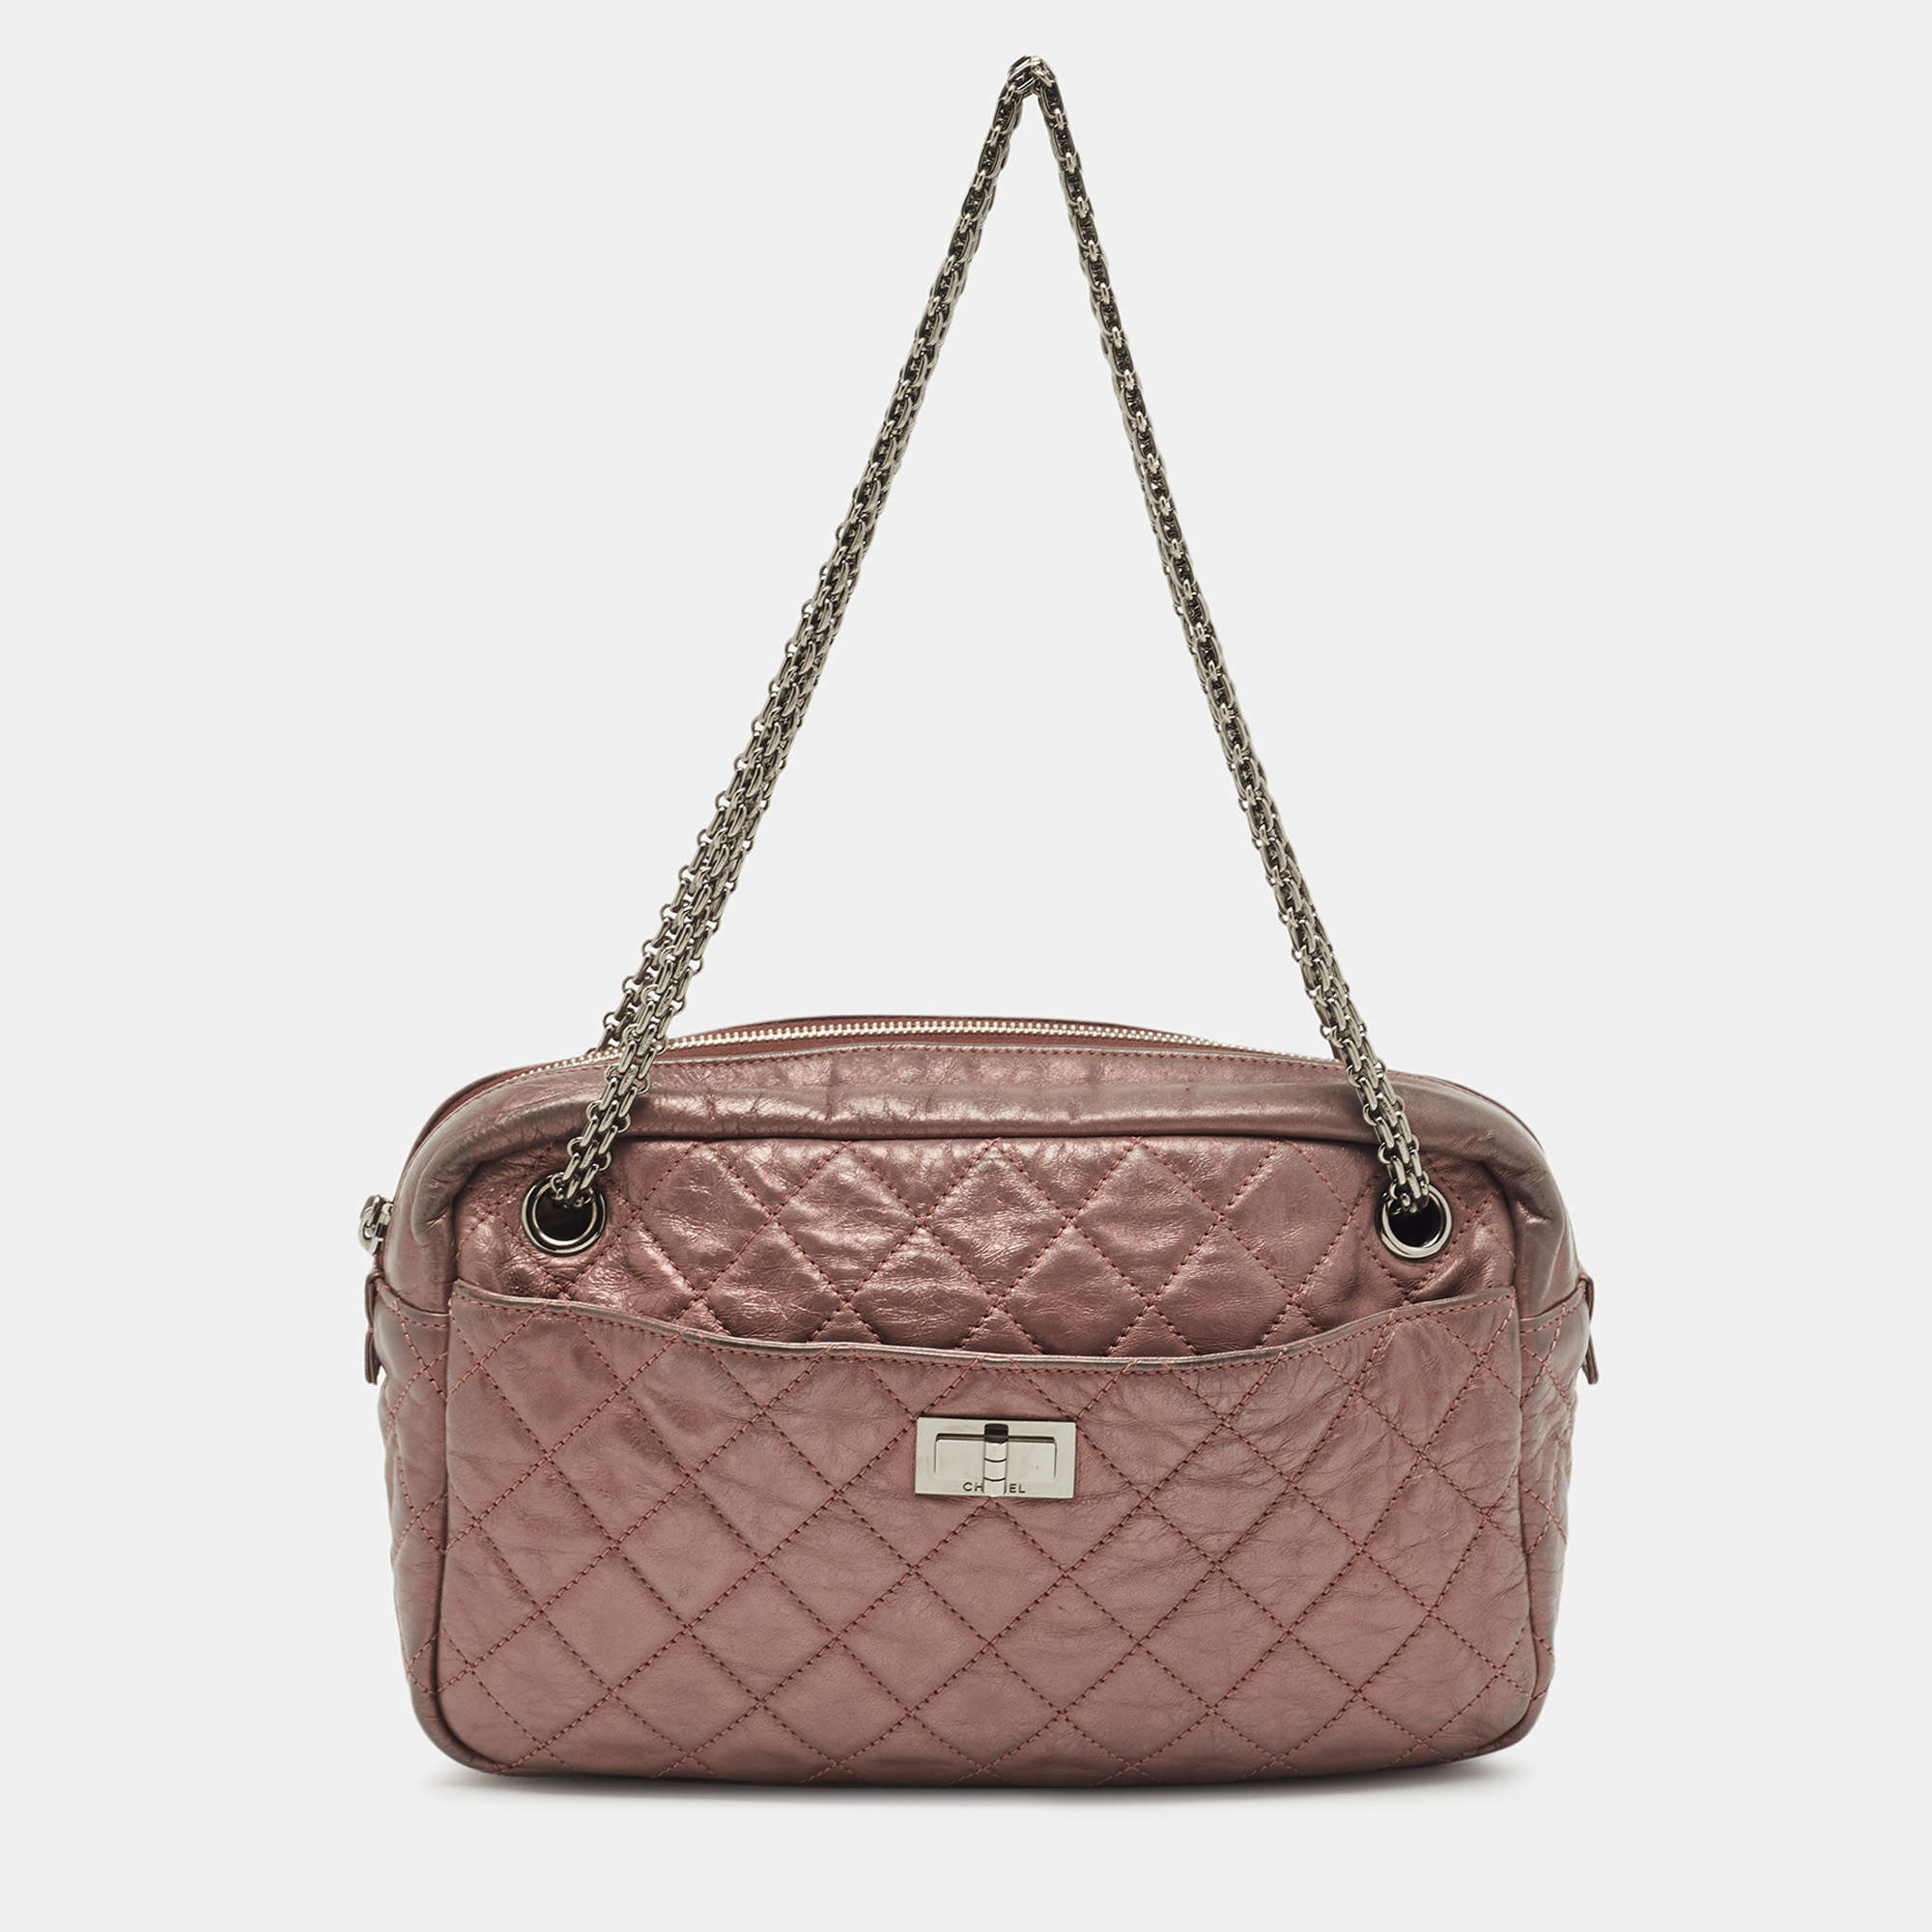 Chanel Metallic Old Rose Crinkled Quilted Leather Reissue Camera Bag Chanel